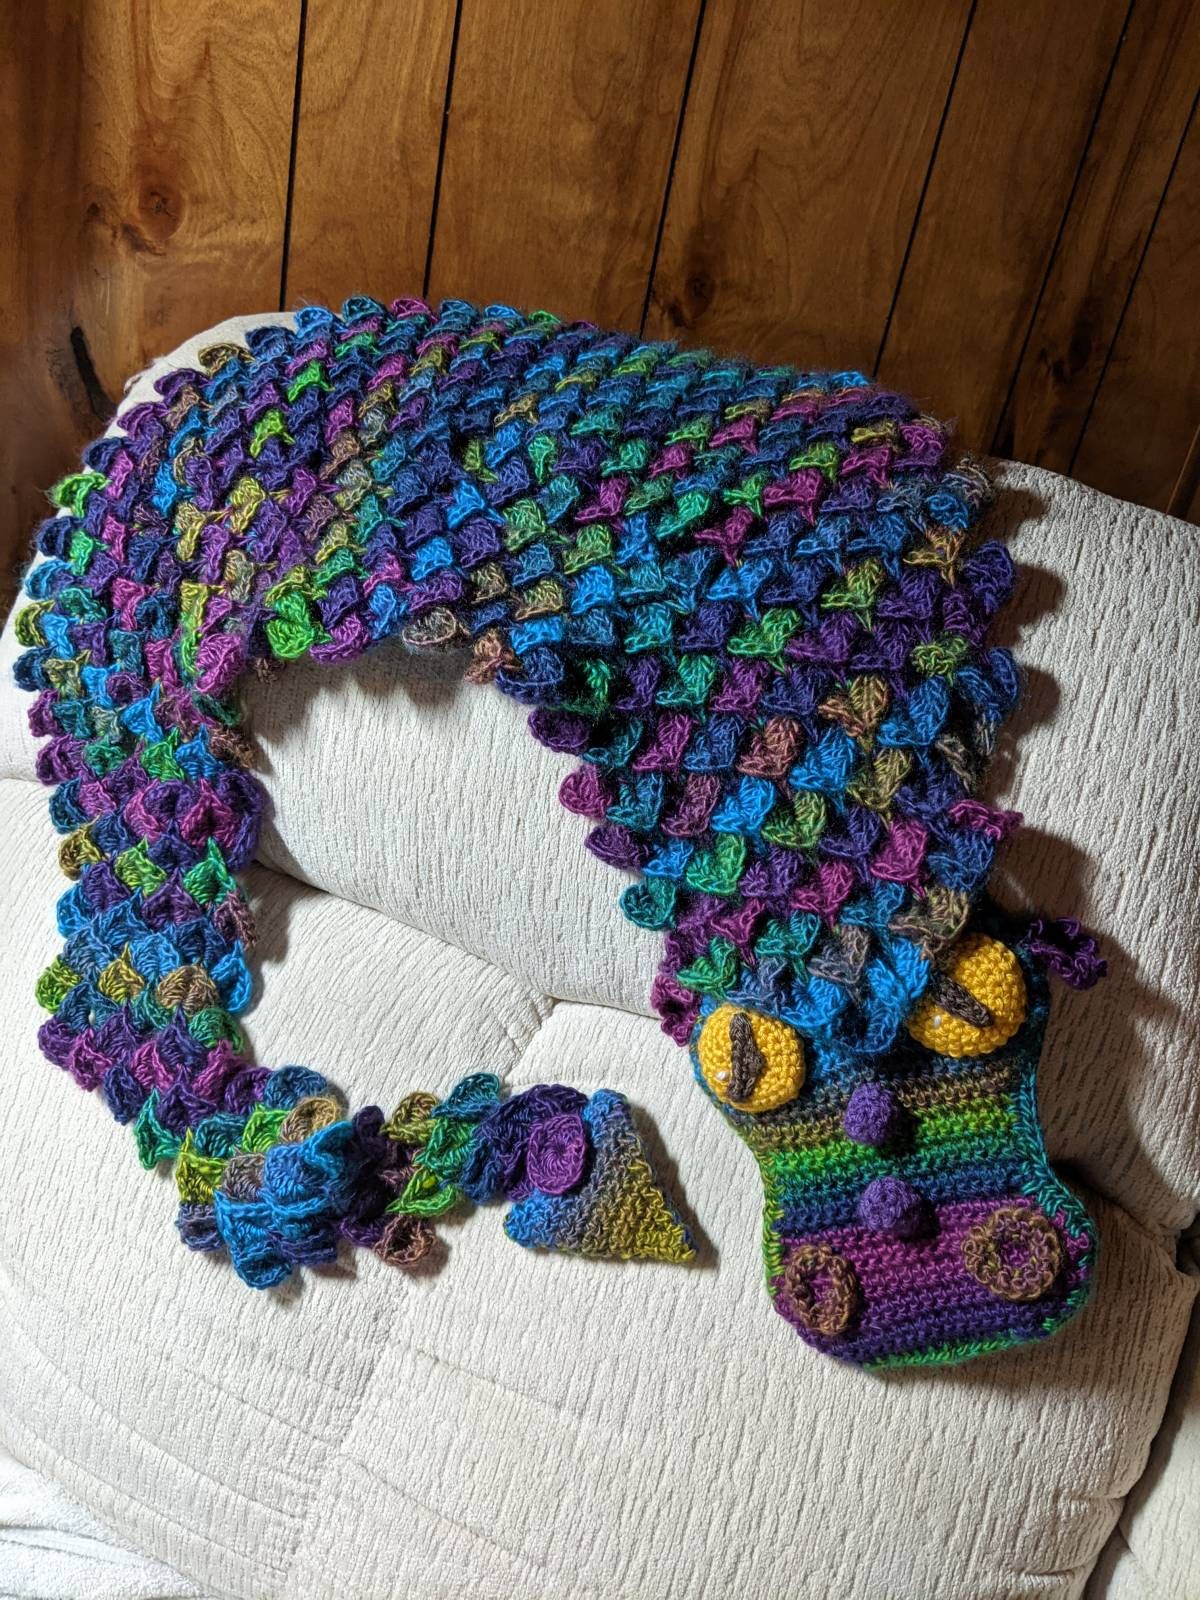 Amigurumi Crochet Dragon Shawl Pattern Review by Evalin Thomas for Cottontail and Whiskers